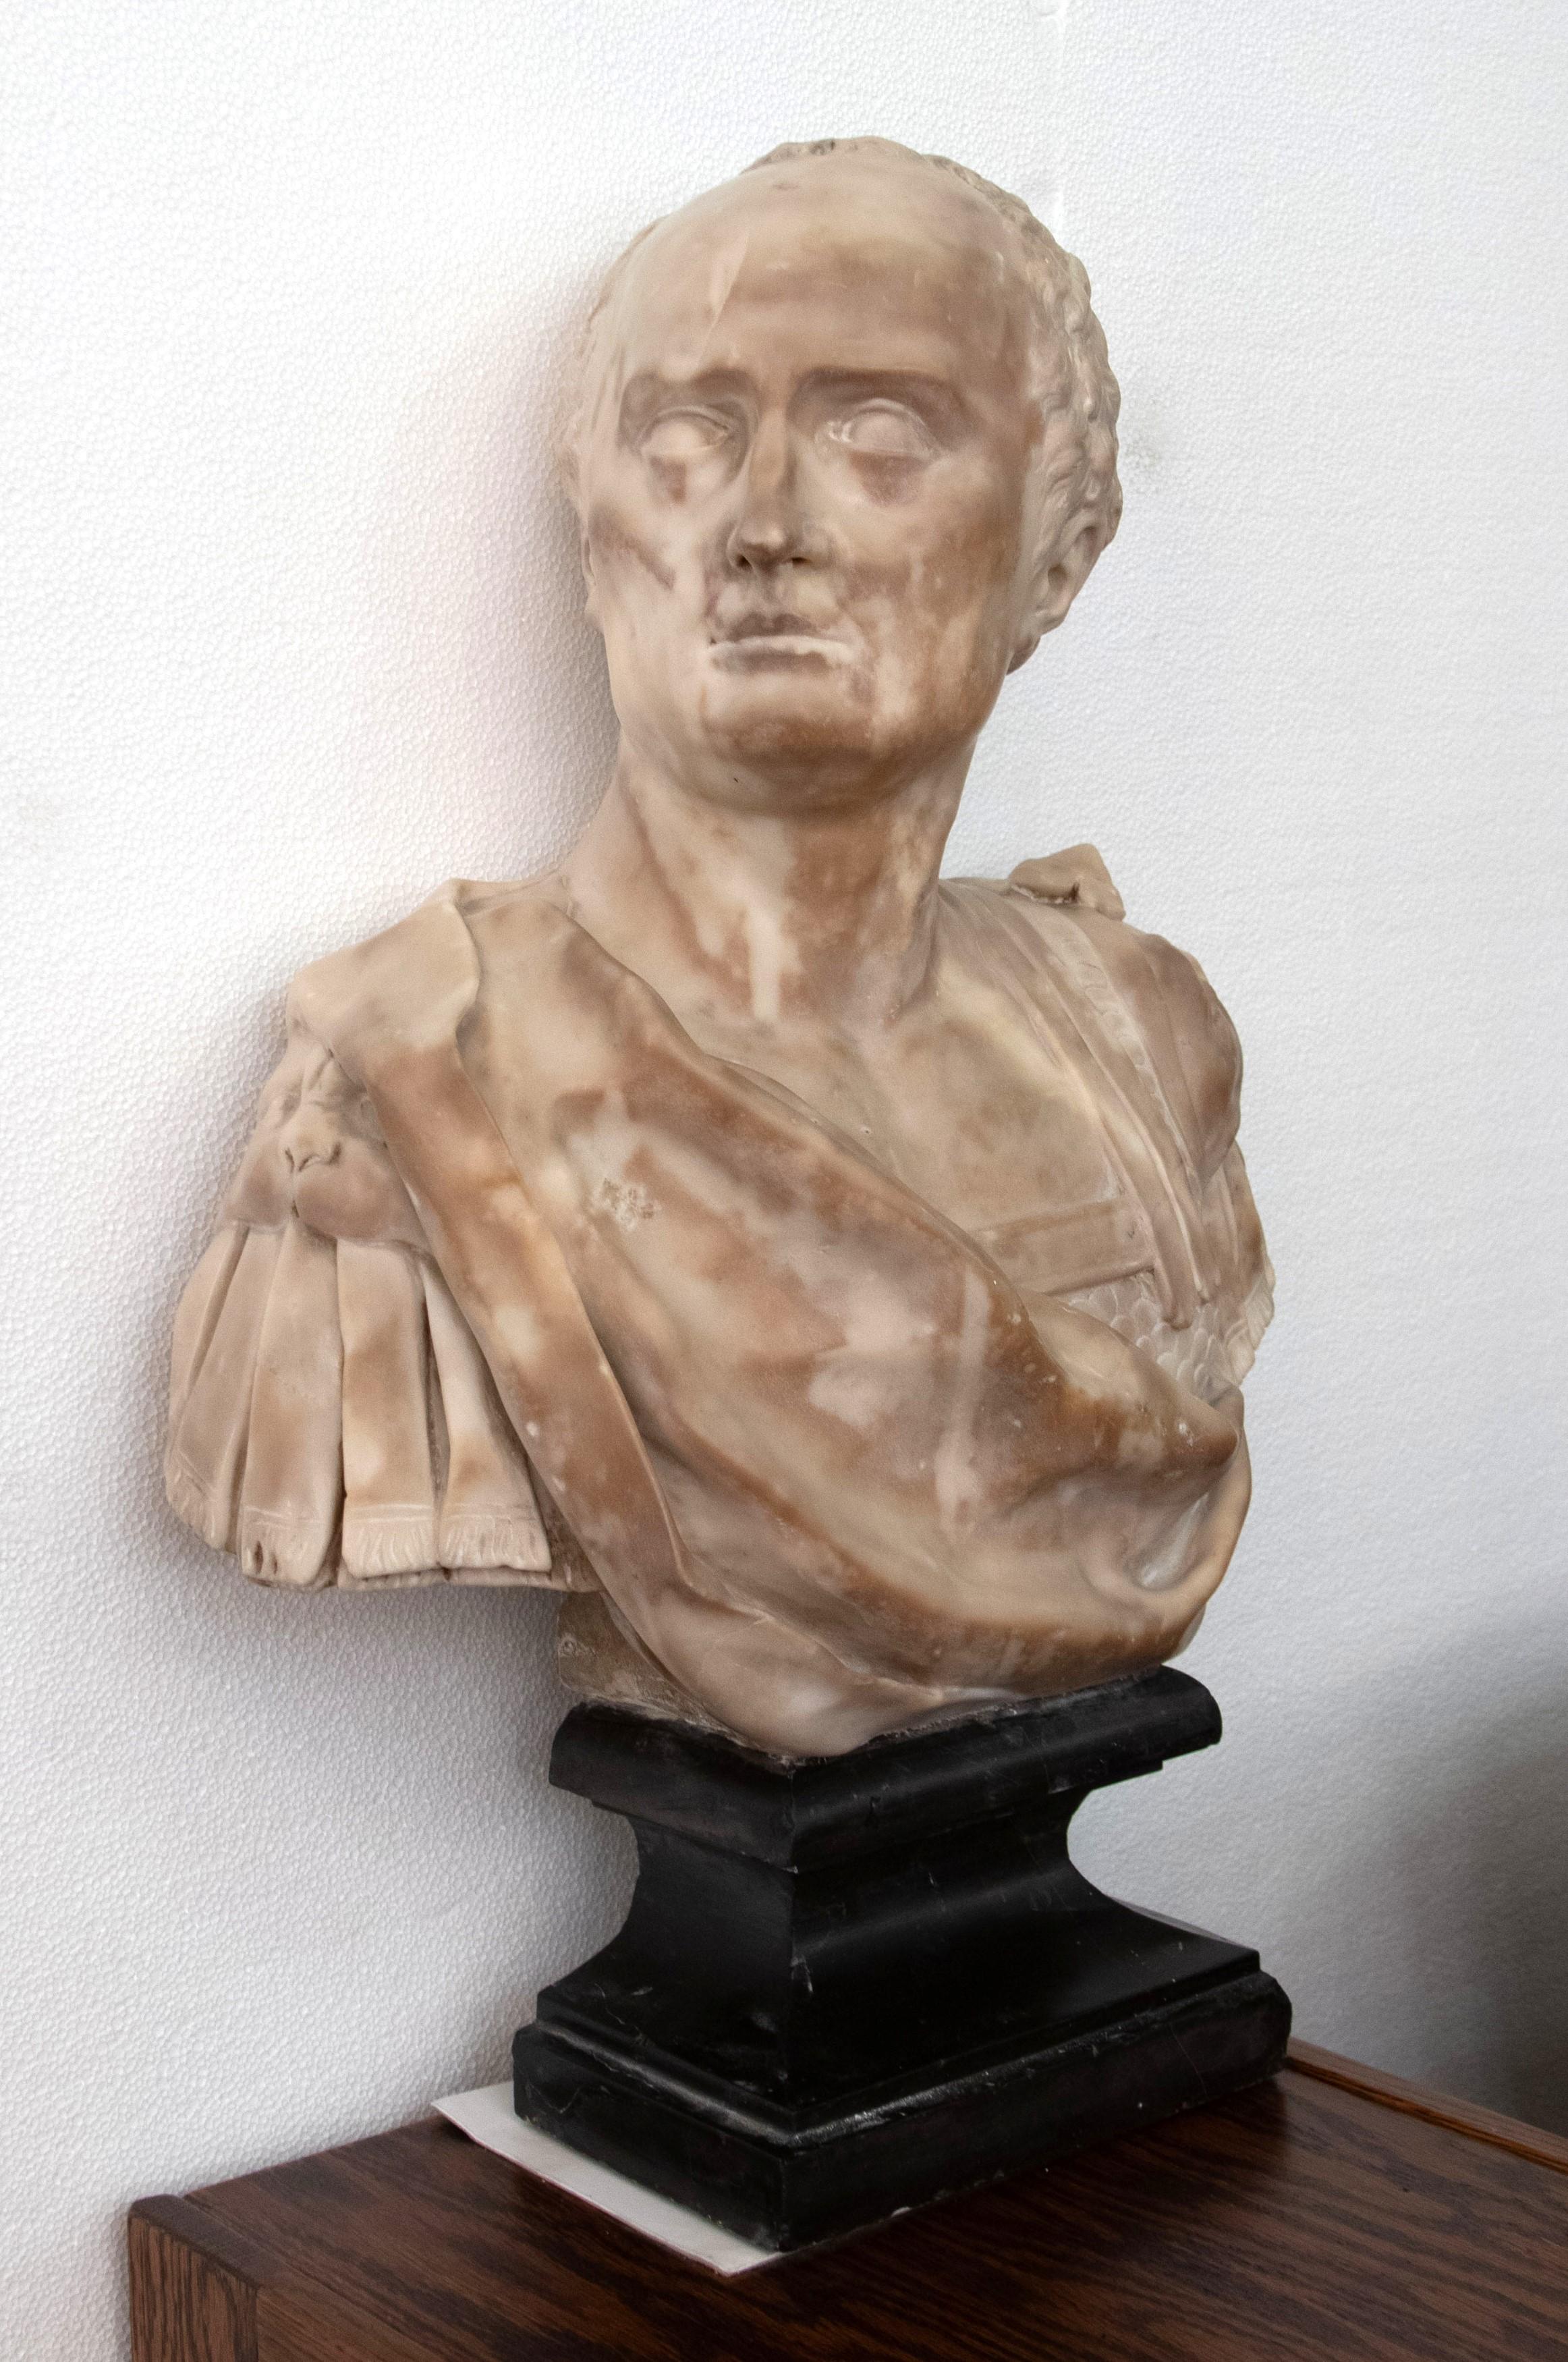 This hand carved bust of Cicero was acquired from an estate located in Greenwich, Connecticut. Made of marble. Inscribed on back of pedestal. Circa 1860s. Good condition with appropriate wear from age. One available. Please note, this item is